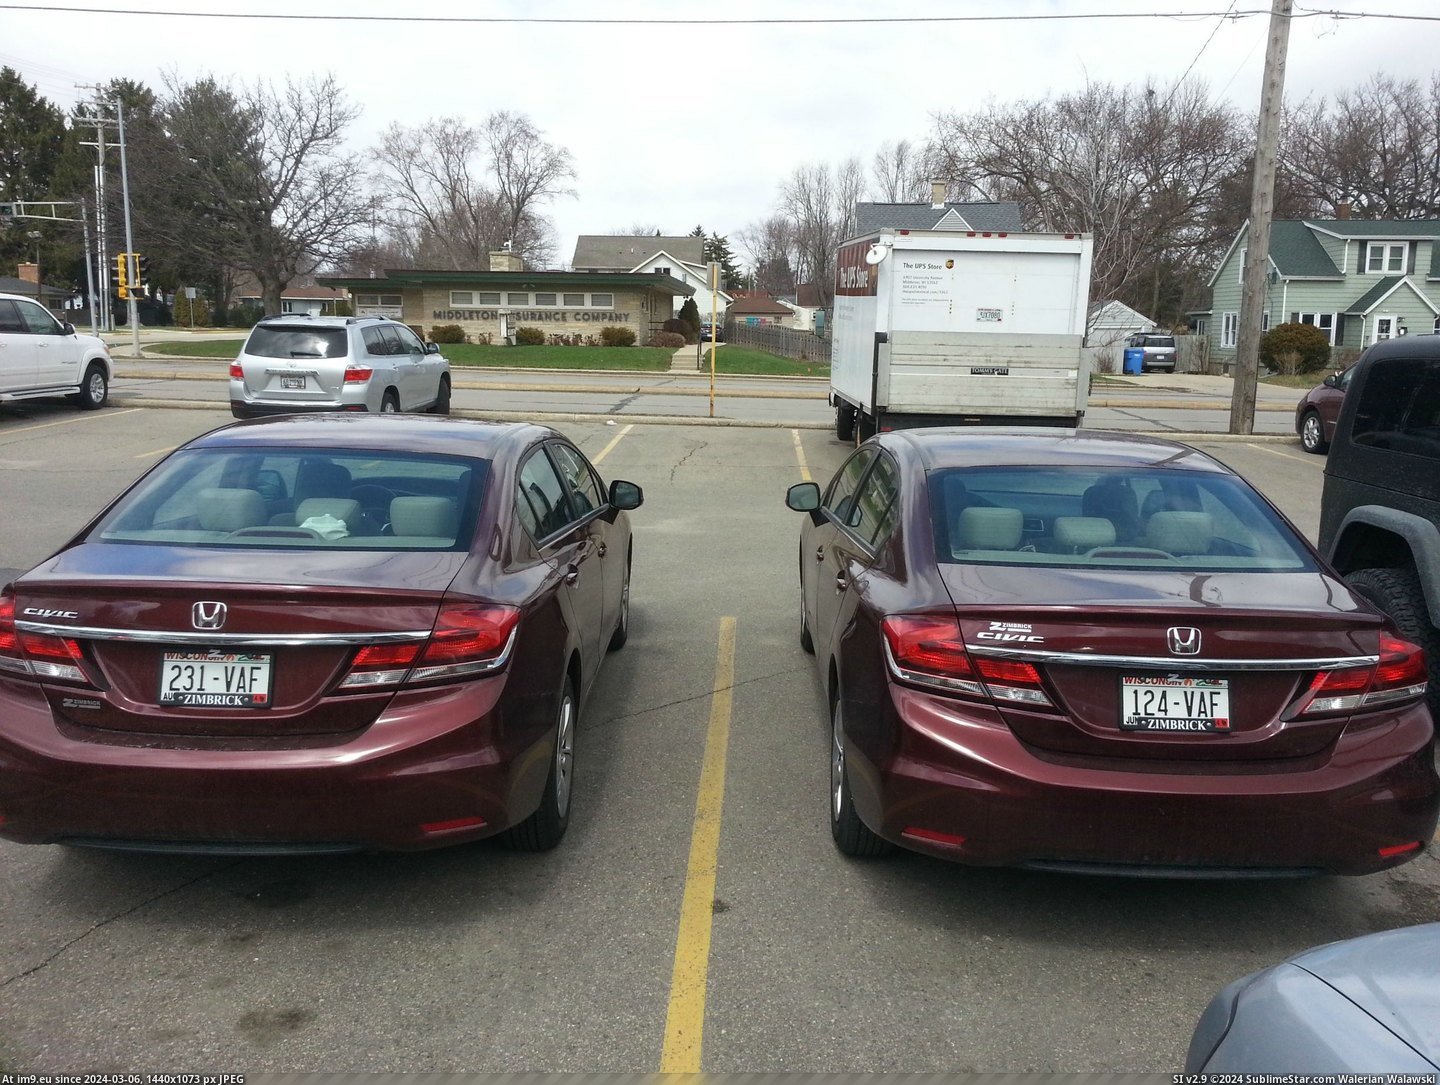 #Car #Slightly #Plate #6ths #Rearranged #Exact #License #Parked [Mildlyinteresting] I parked next to my exact car today, down to 5-6ths of the license plate (slightly rearranged). Pic. (Изображение из альбом My r/MILDLYINTERESTING favs))